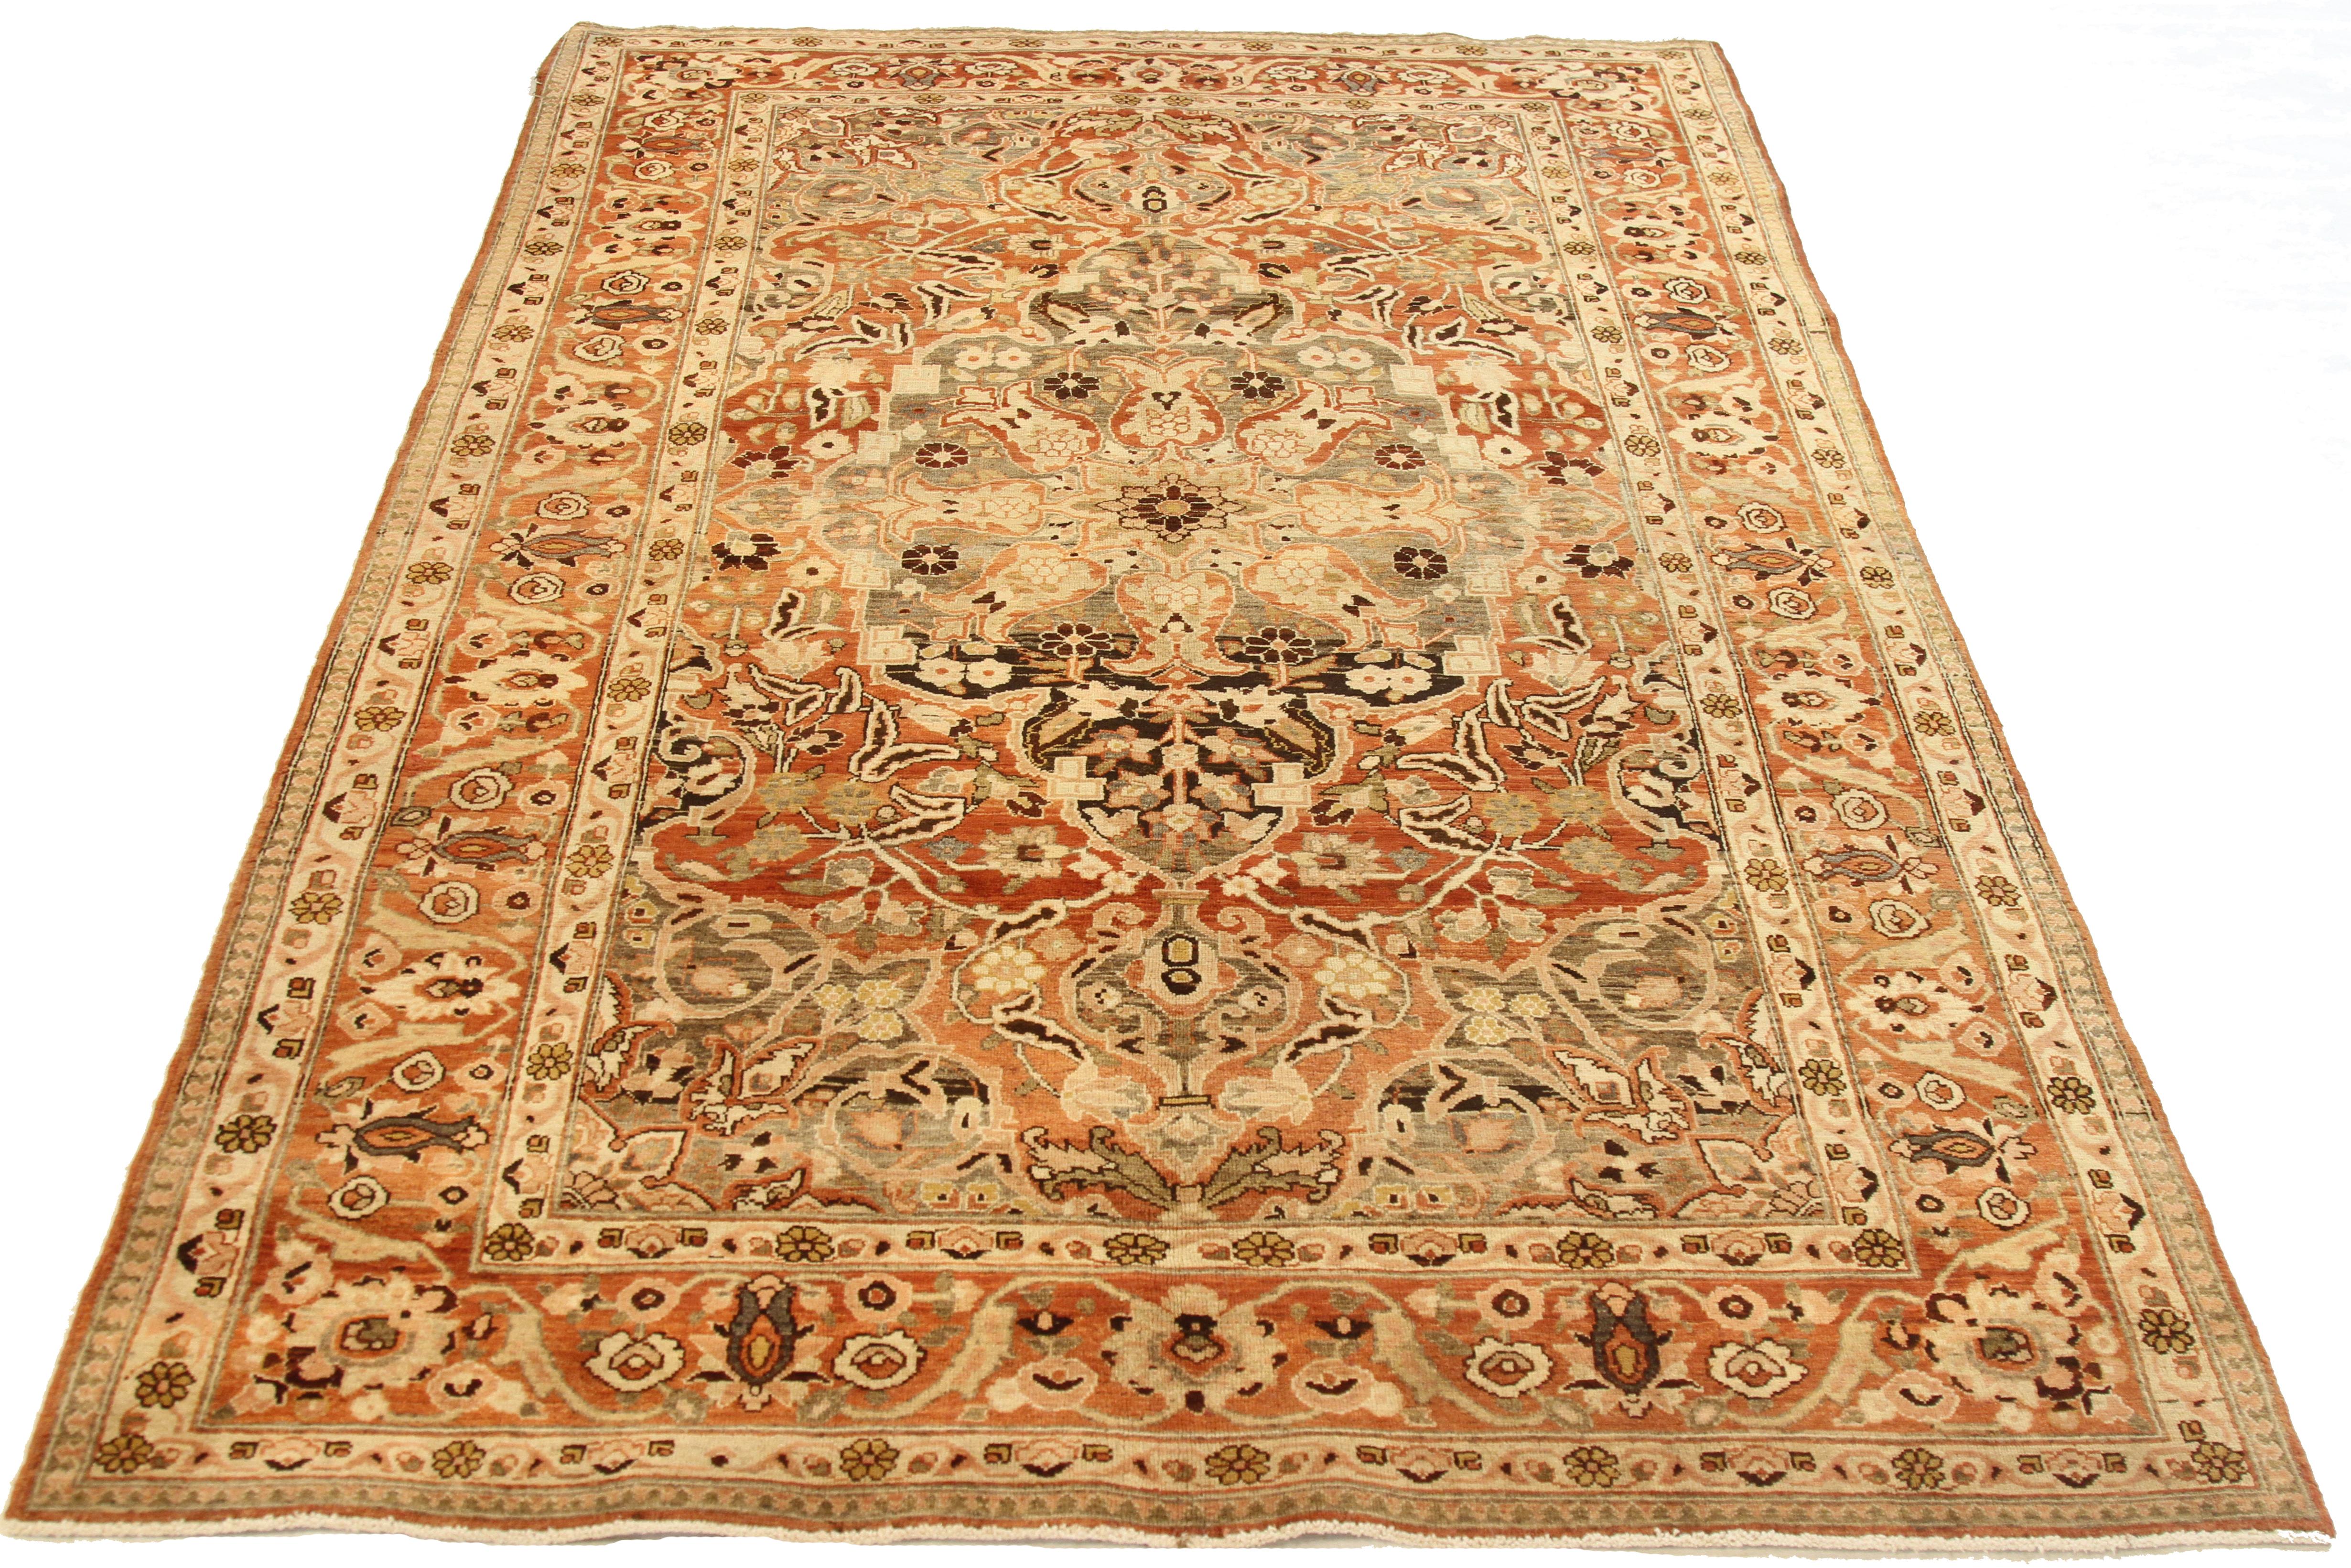 Antique hand-woven Persian area rug made from fine wool and all-natural vegetable dyes that are safe for people and pets. This beautiful piece features a rich field of tribal and floral details in various colors which is the traditional weaving